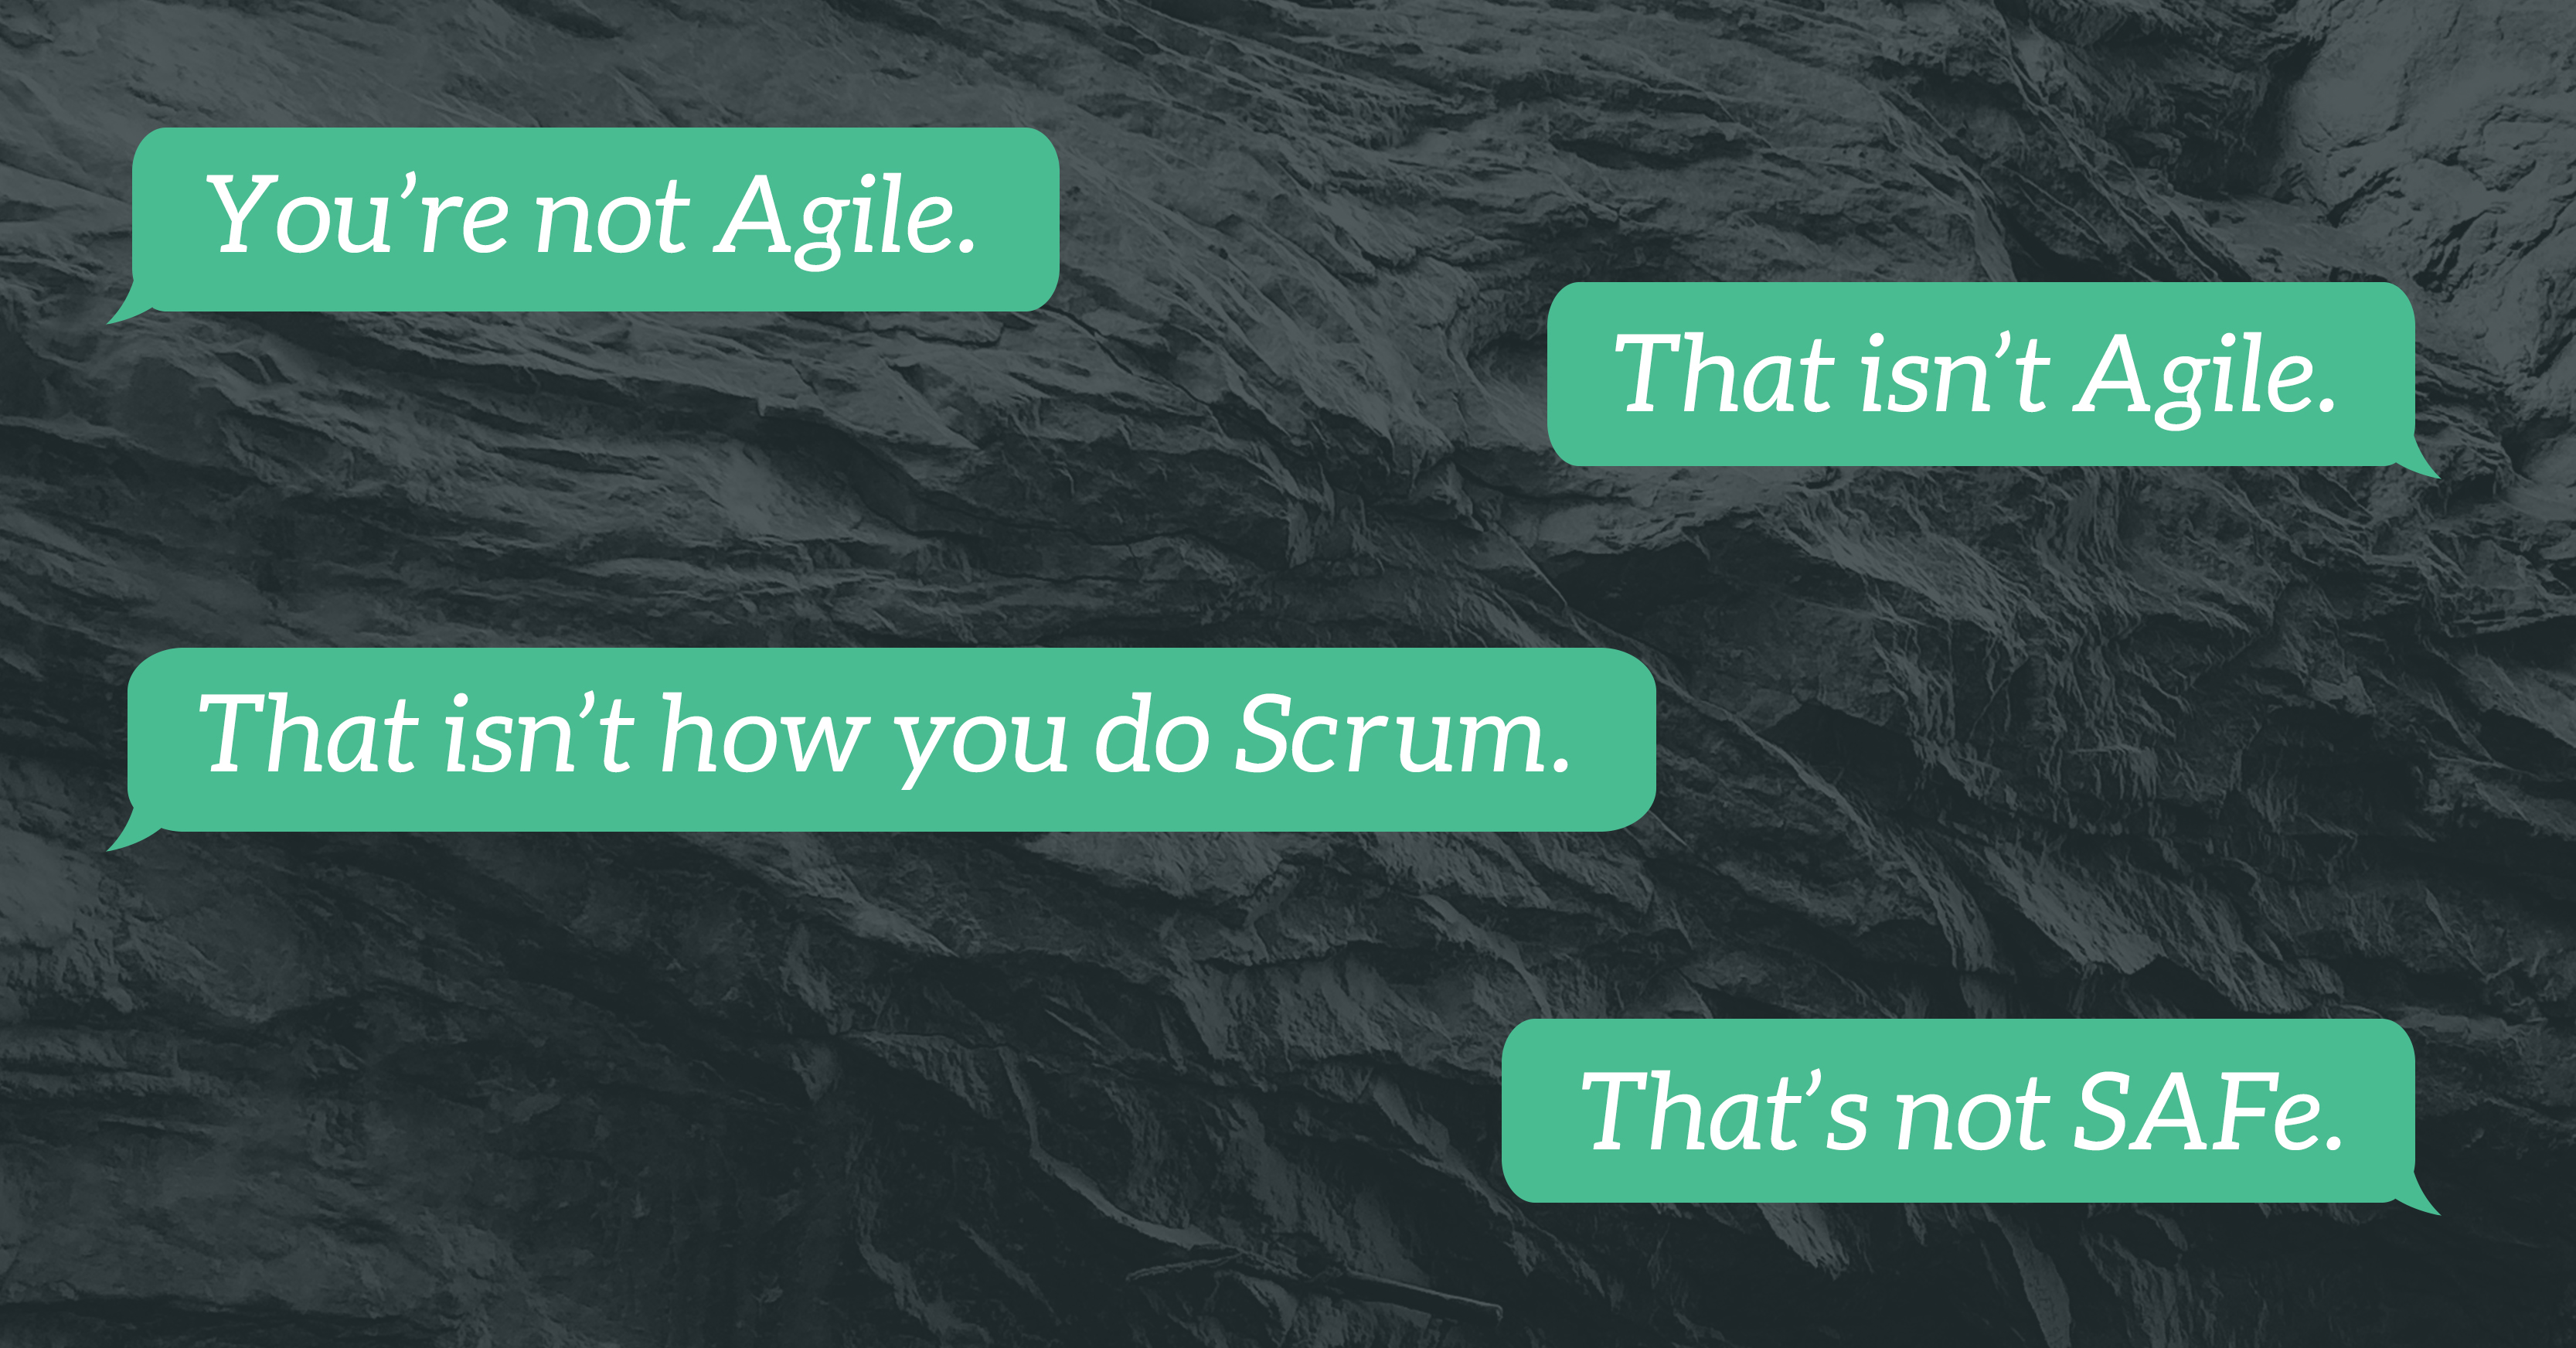 Does Your Agile Lead to Agility?